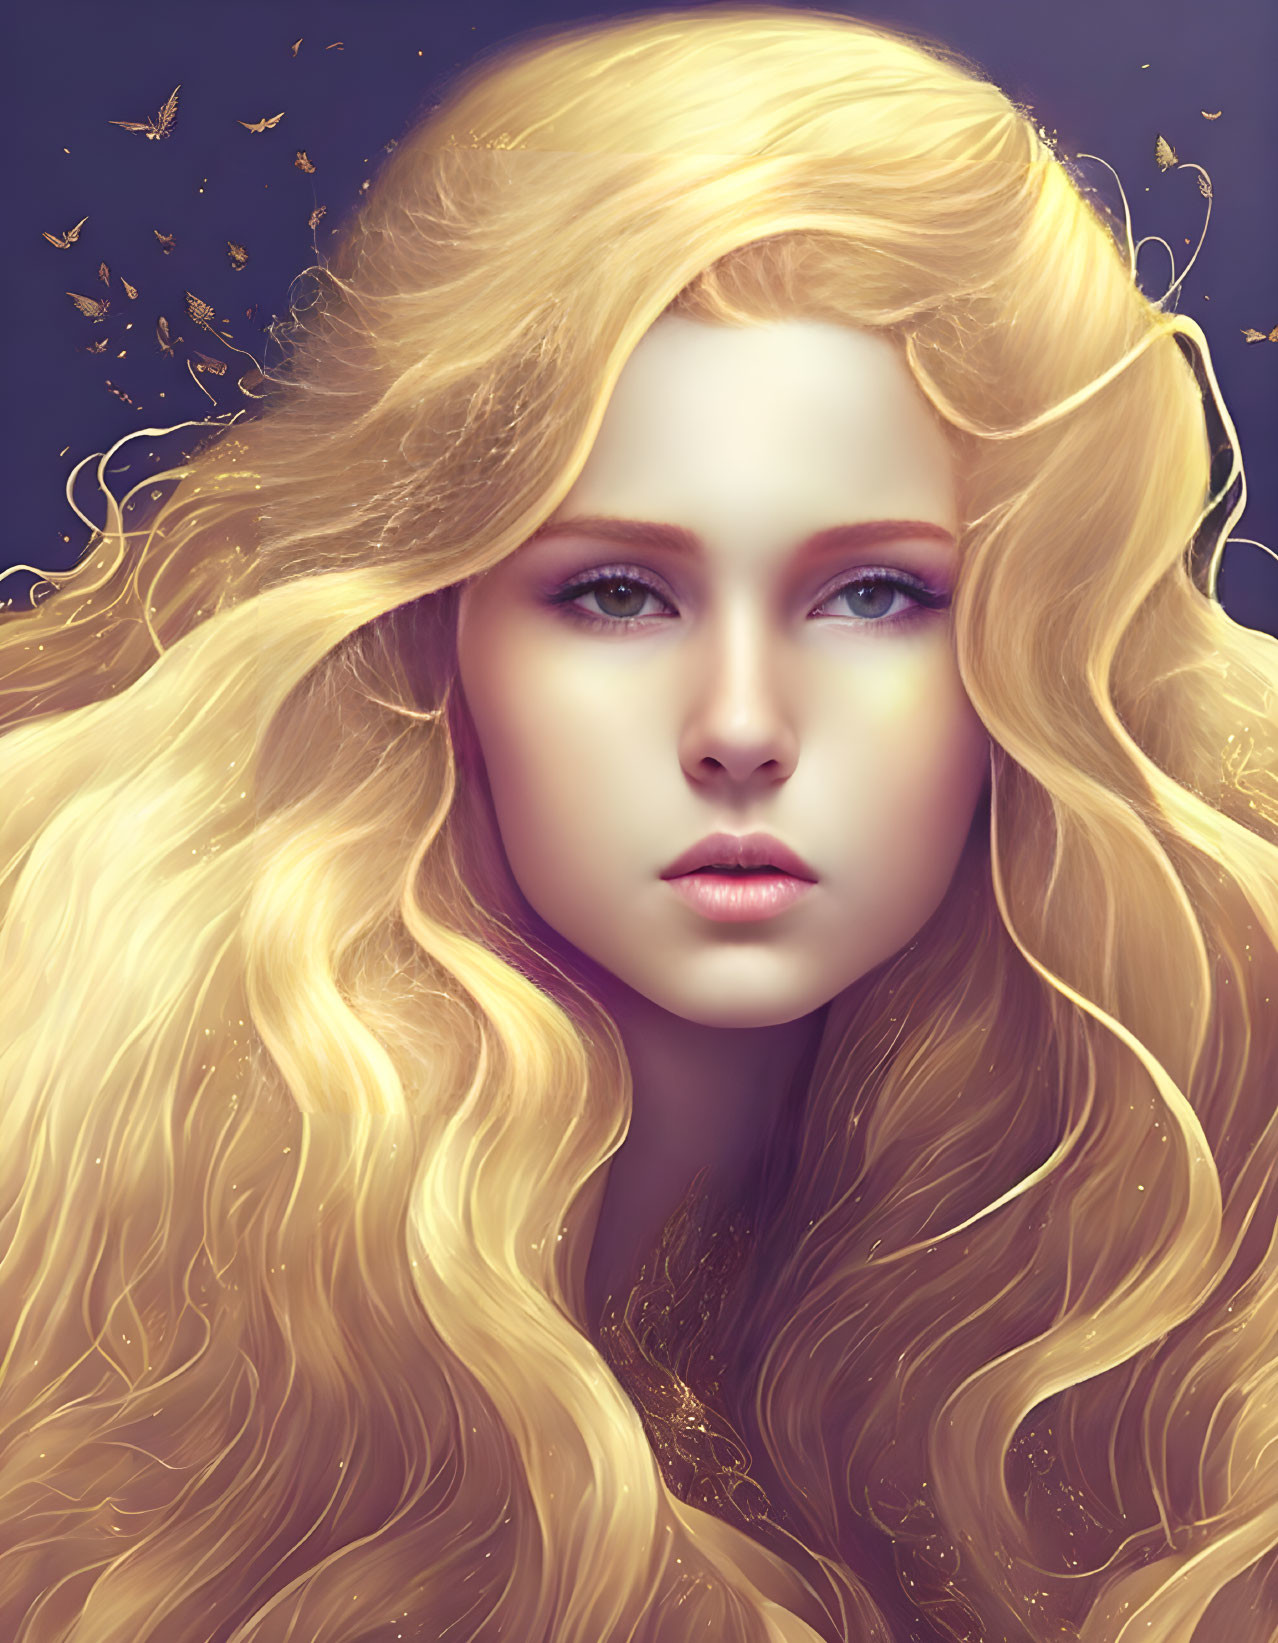 . "The Girl With The Golden Hair"